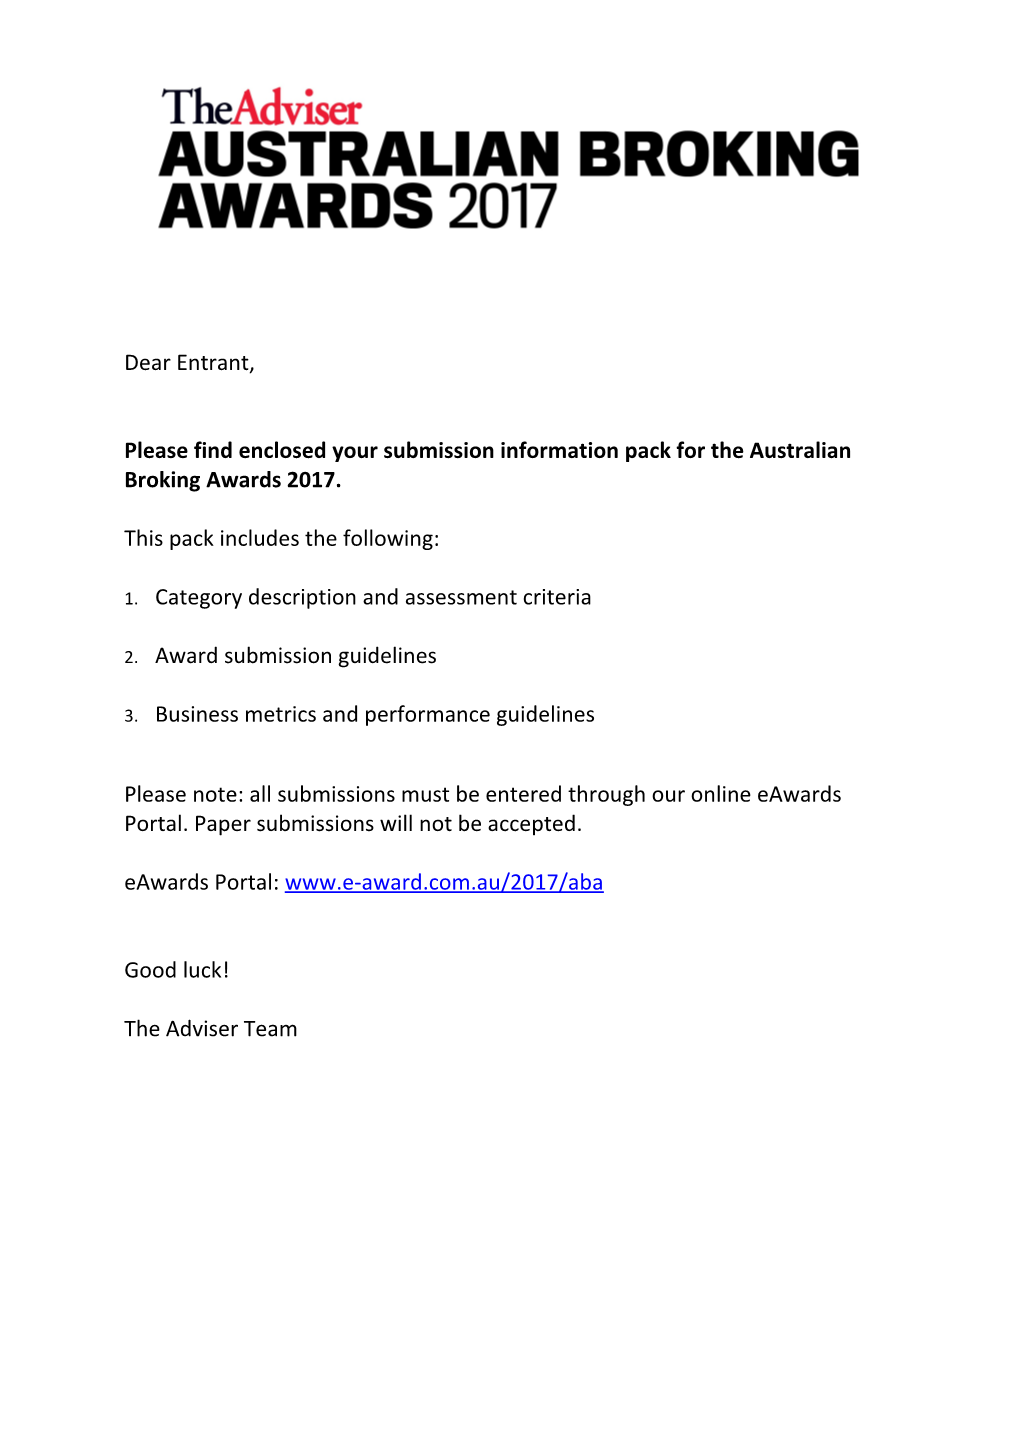 Please Find Enclosed Your Submission Information Pack for the Australian Broking Awards 2017